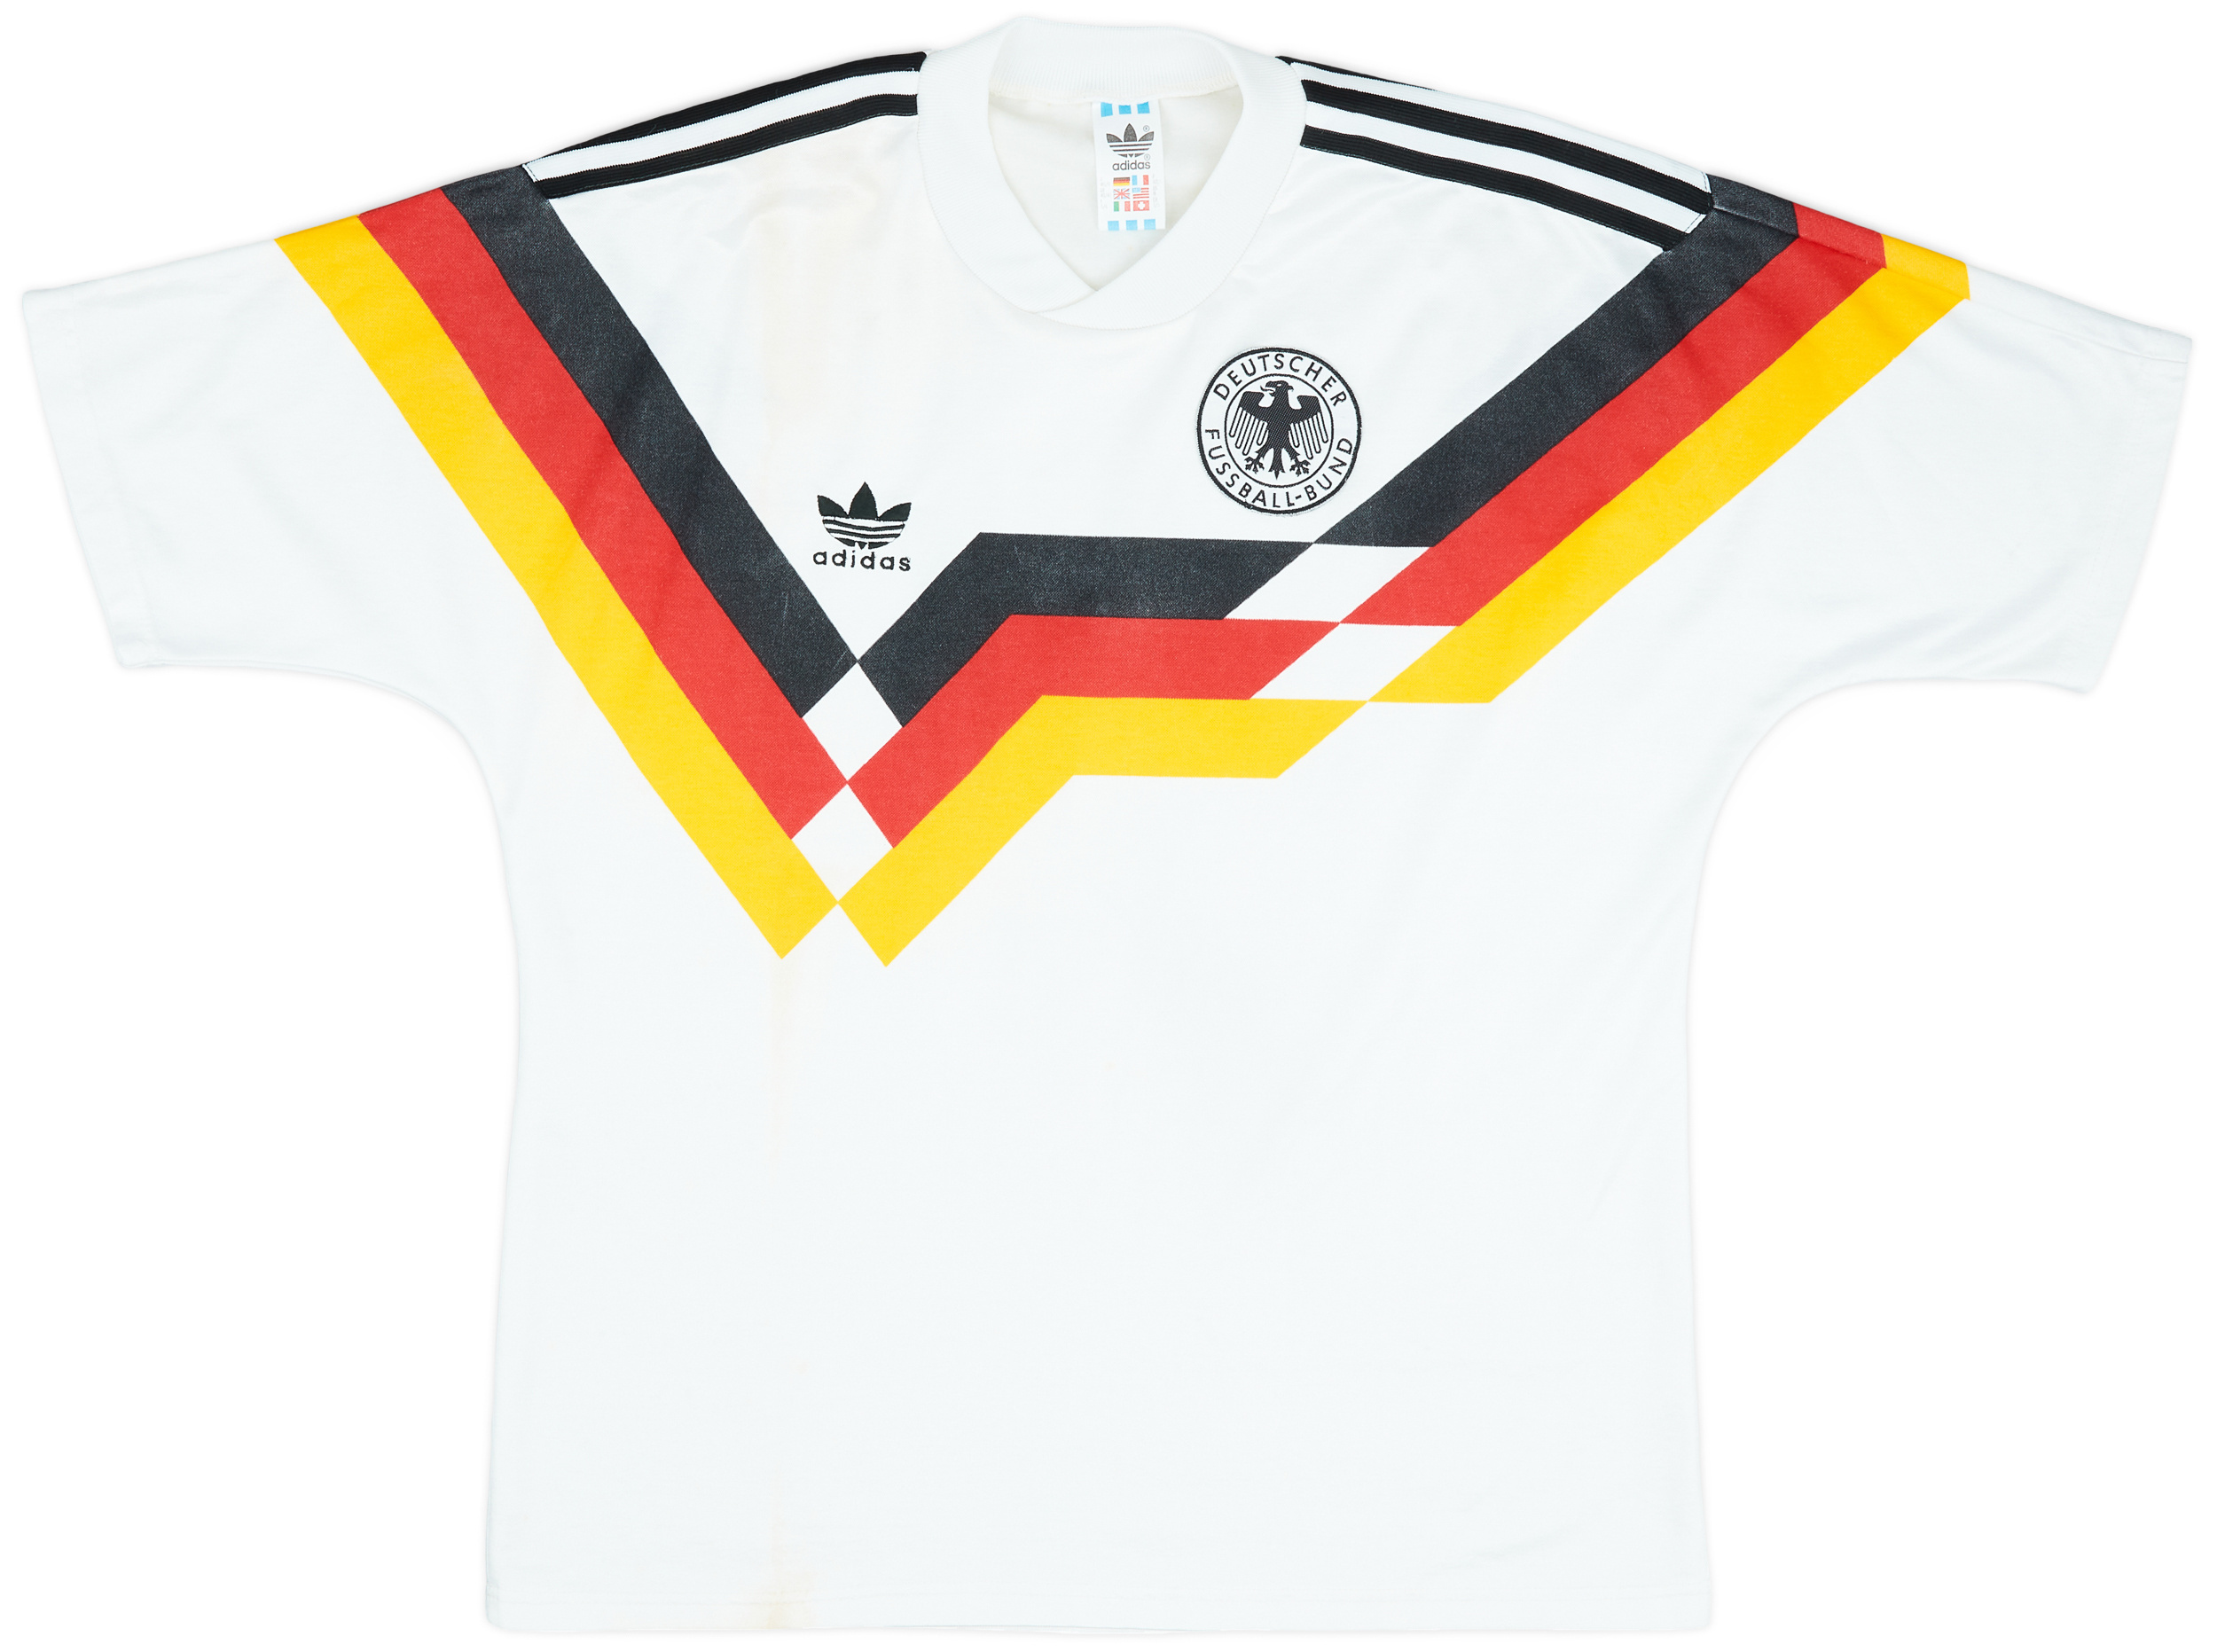 1988-91 West Germany Home Shirt - 6/10 - (/)